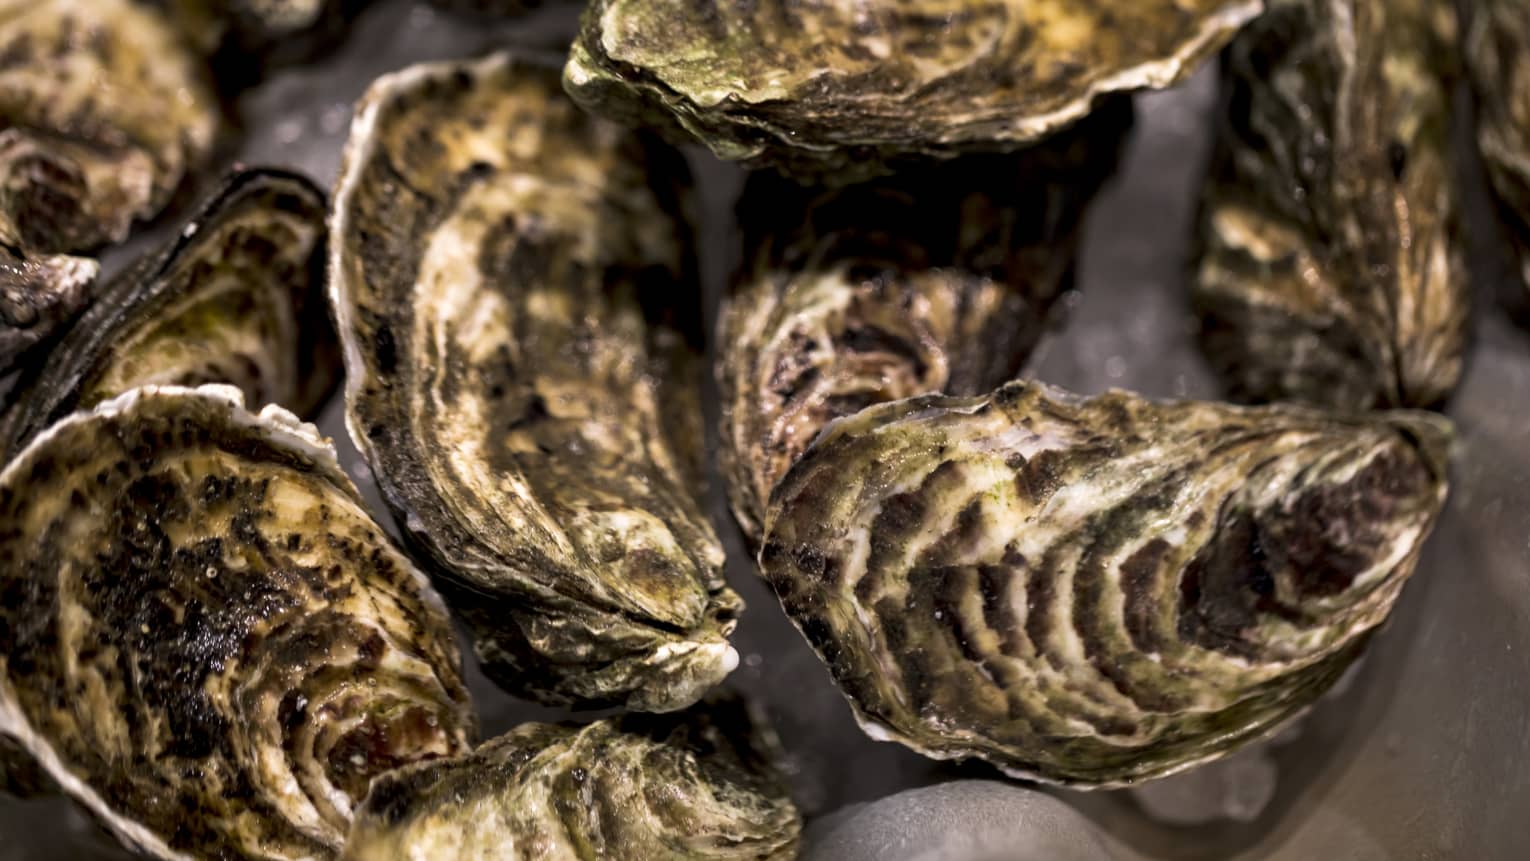 Close up image of oysters.